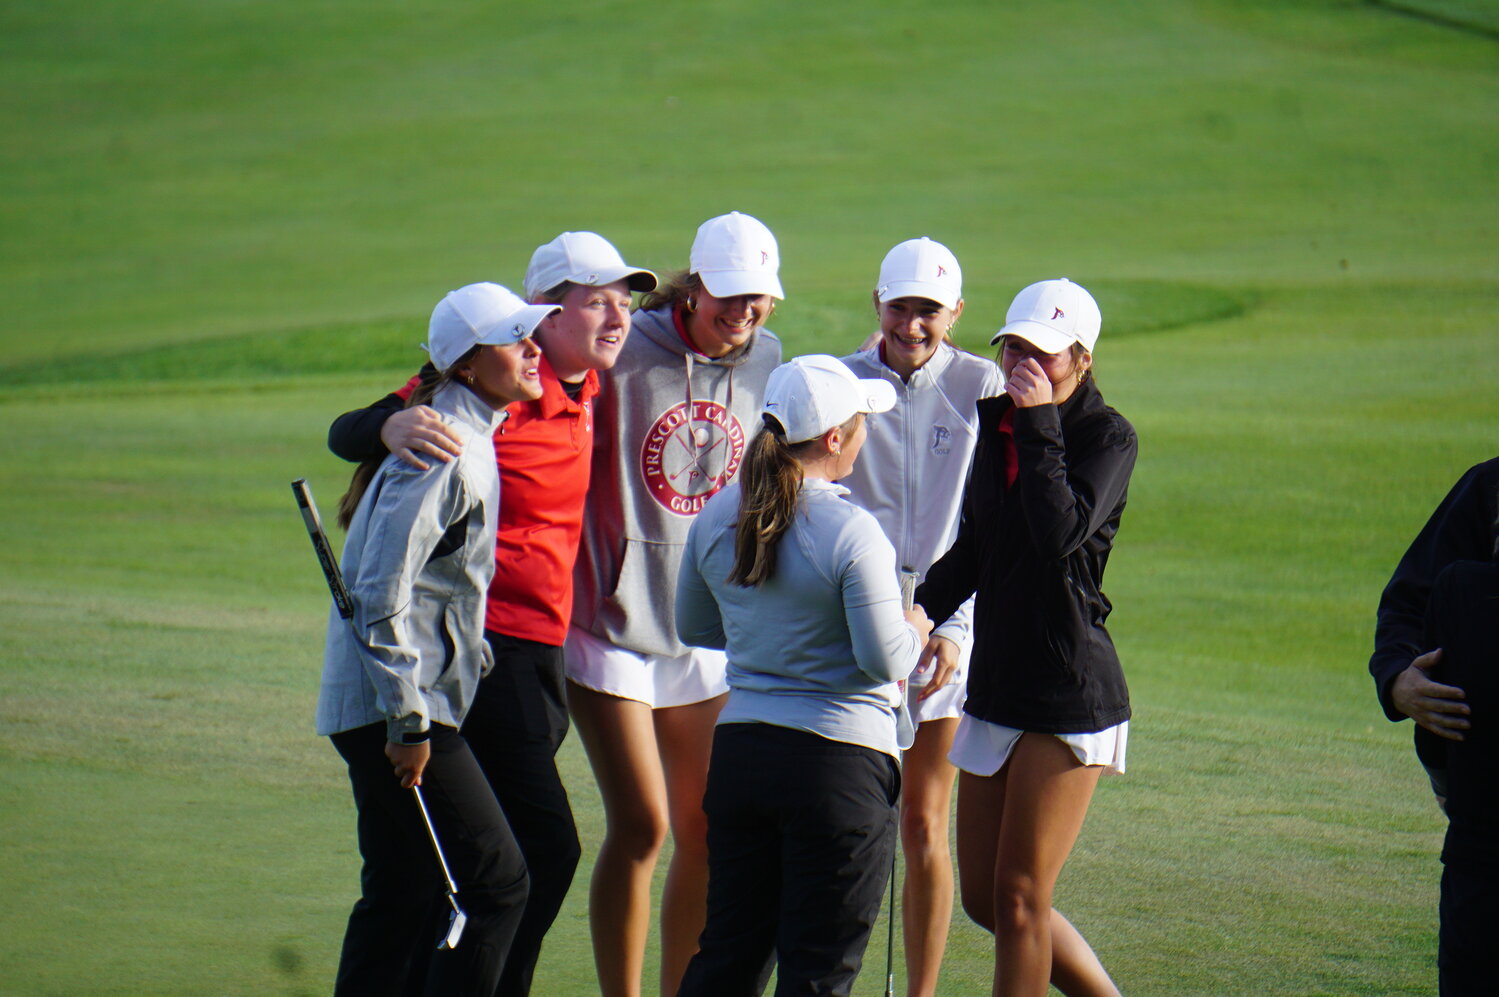 The Prescott Cardinals stormed back on their second nine Tuesday afternoon to win their fourth consecutive Division 4 State Championship Tuesday at University Ridge in Madison. At far left, Gabby Matzek watched her long putt on the last hall roll in to ice the victory. At left, the state squad celebrated their win on the green - Jeanne Rohl, Gabby Matzek, Lydia Feran, Macy Reiter, Layla Salay and Anika Fredericks.